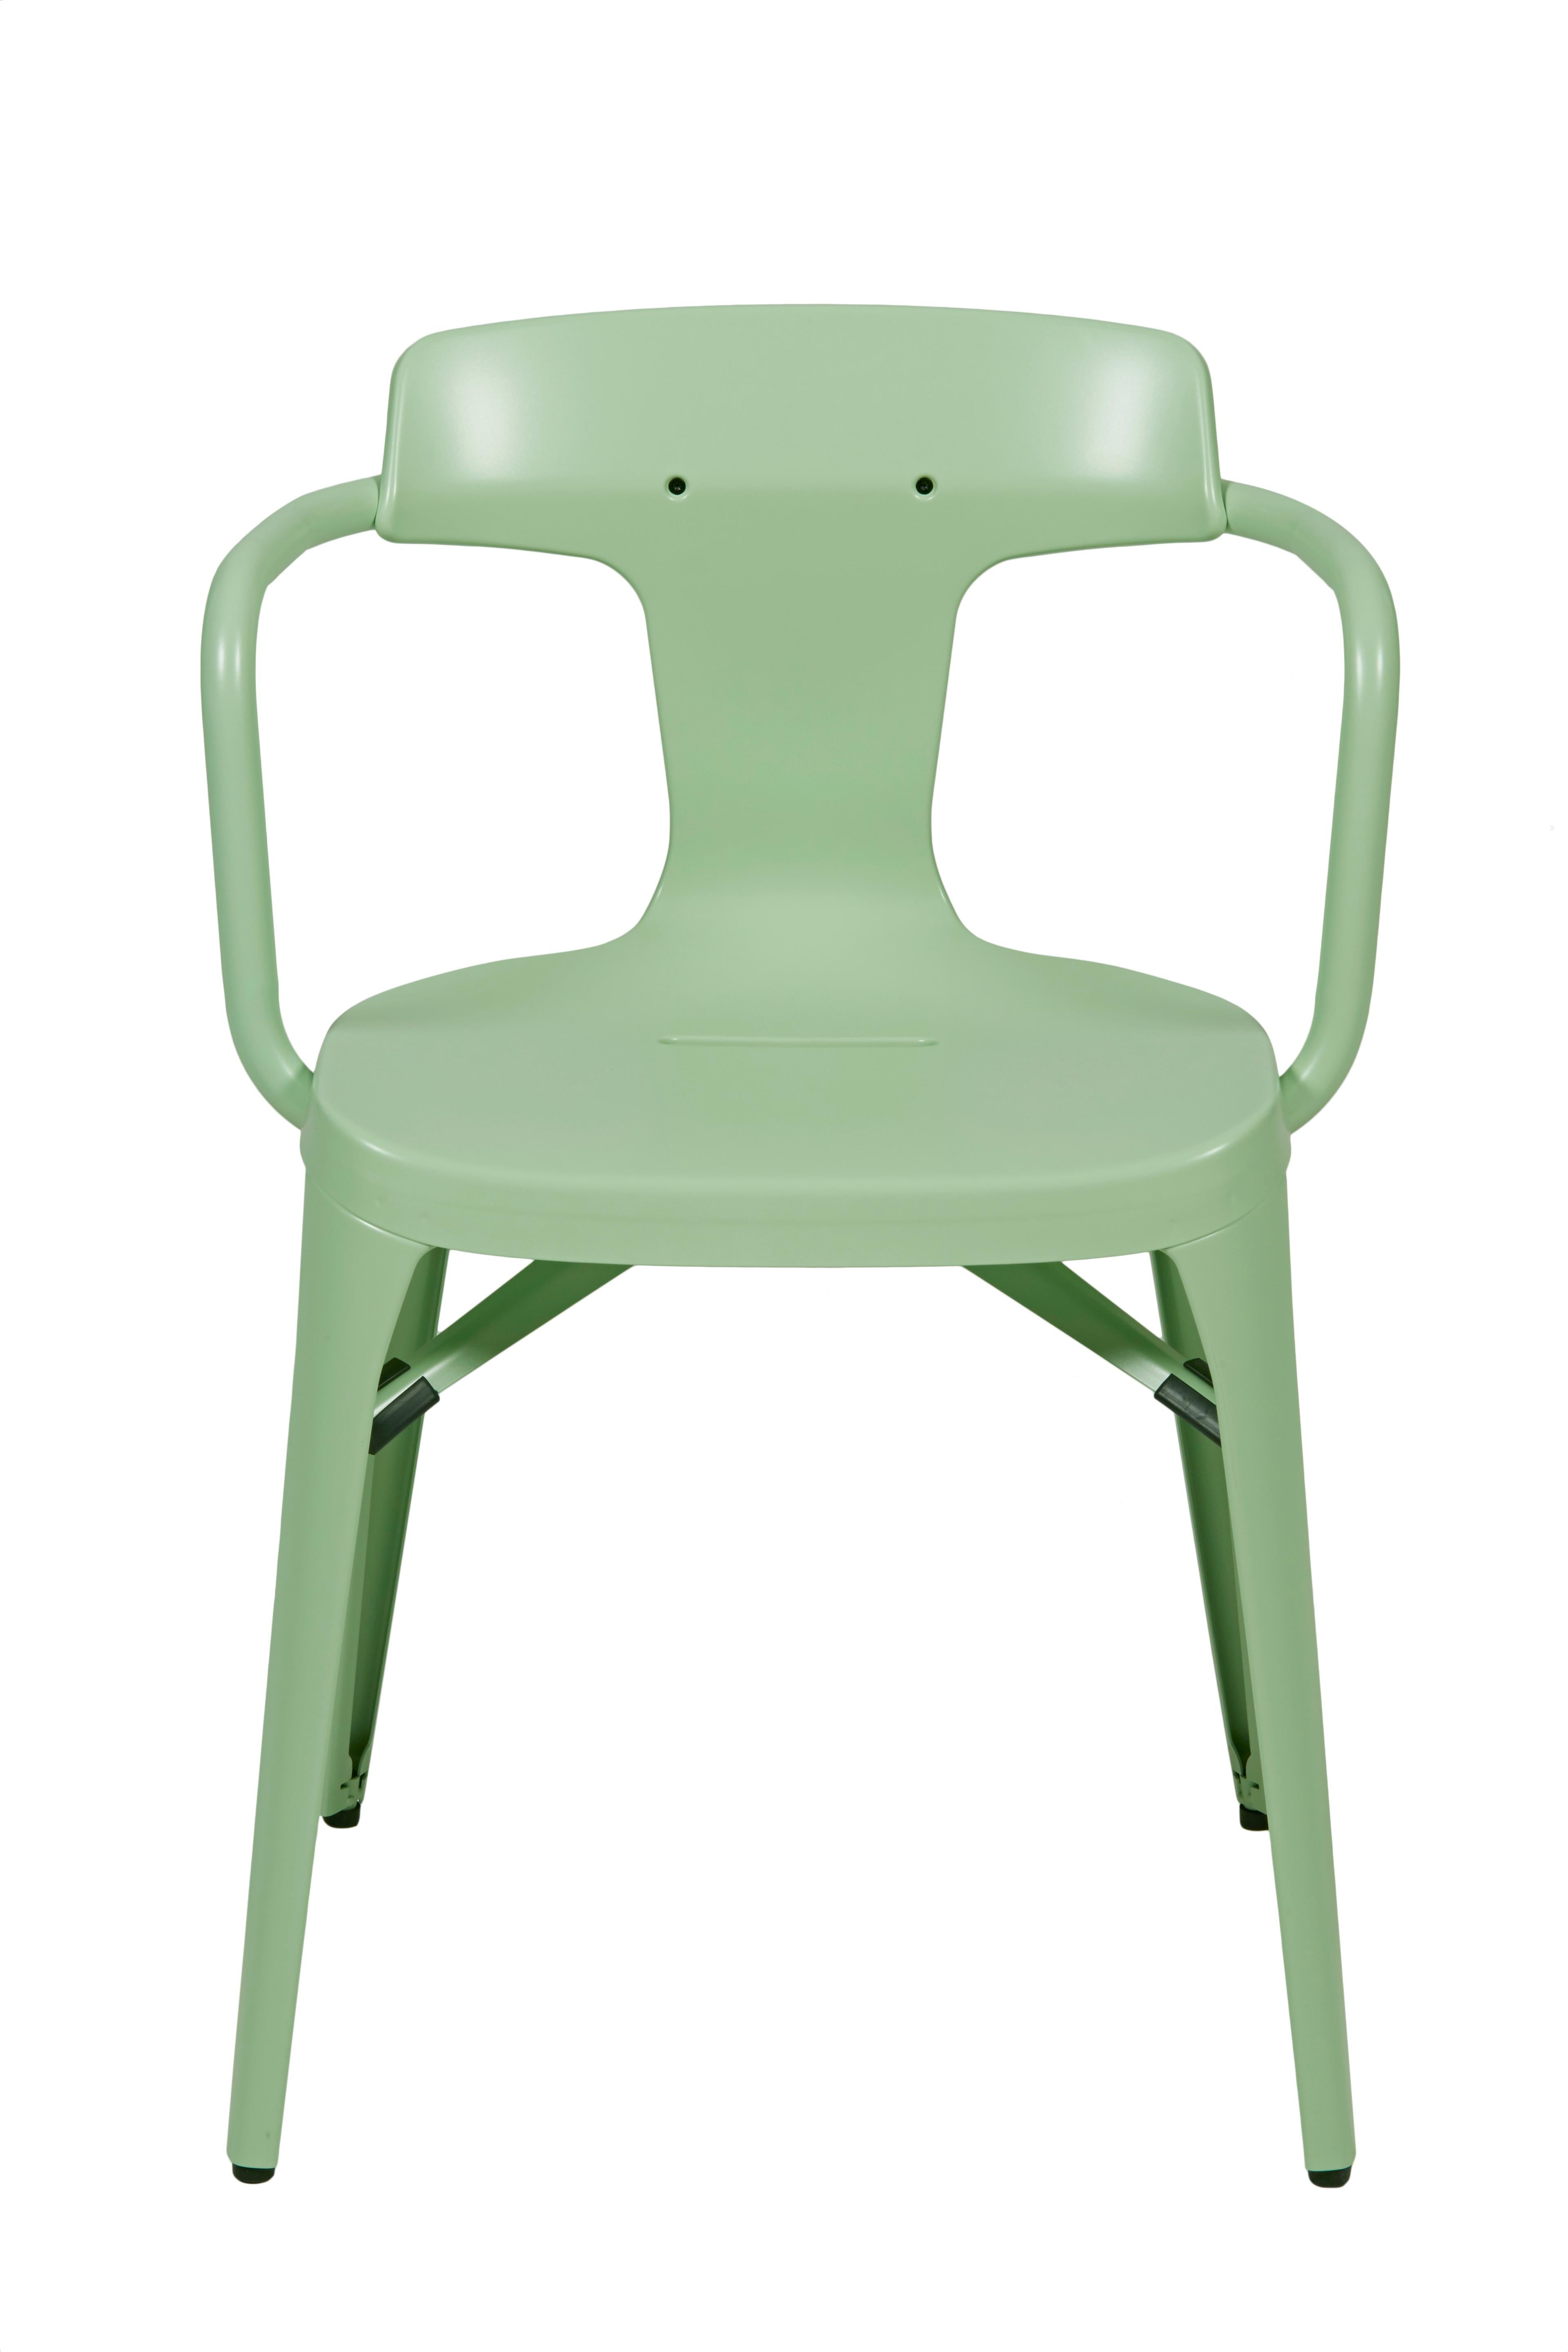 Im Angebot: T14 Chair in Pop Colors by Patrick Norguet and Tolix, Green (Vert Anis)